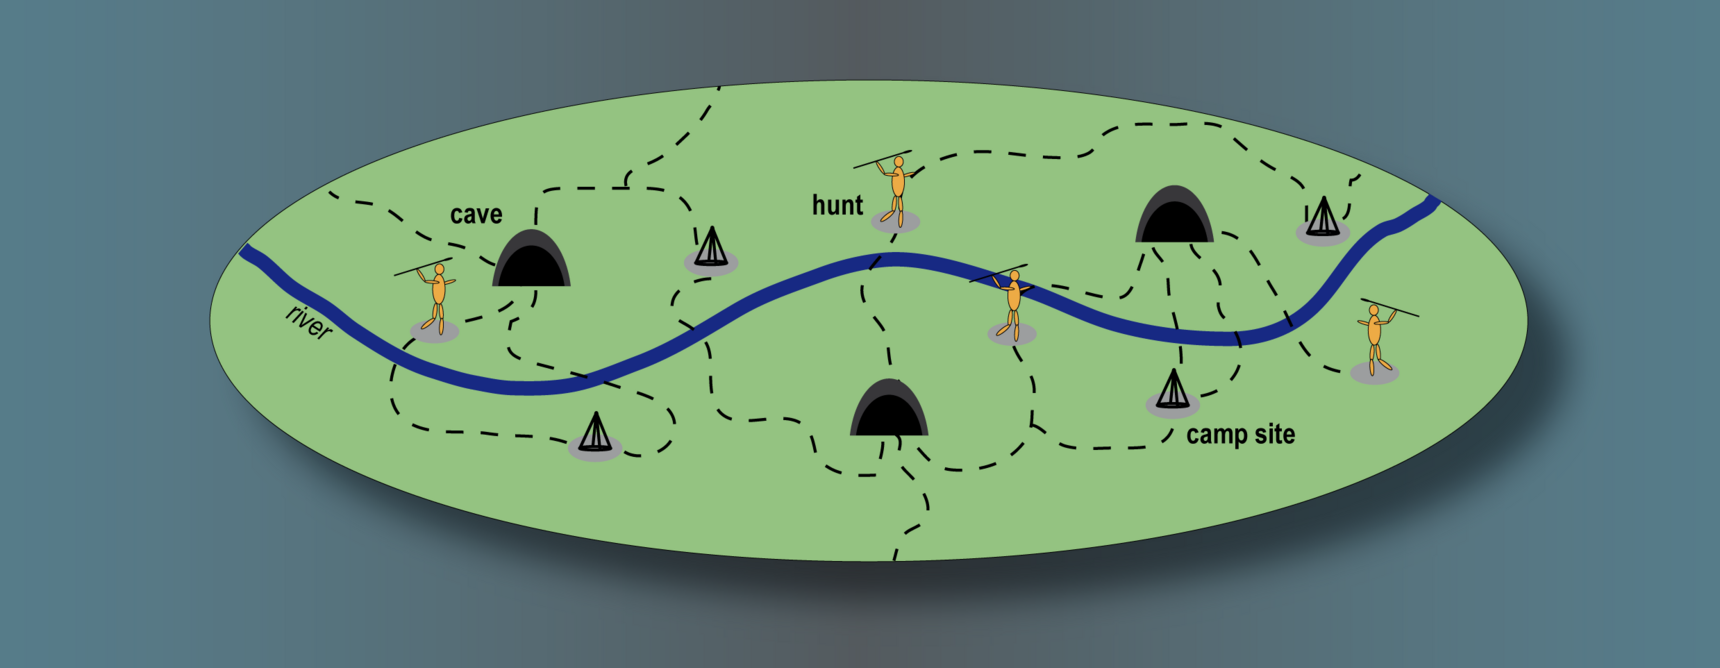 Simplified scheme of a settlement pattern of Ice Age hunter-gatherers. In addition to caves people also settled in open air camp sites.